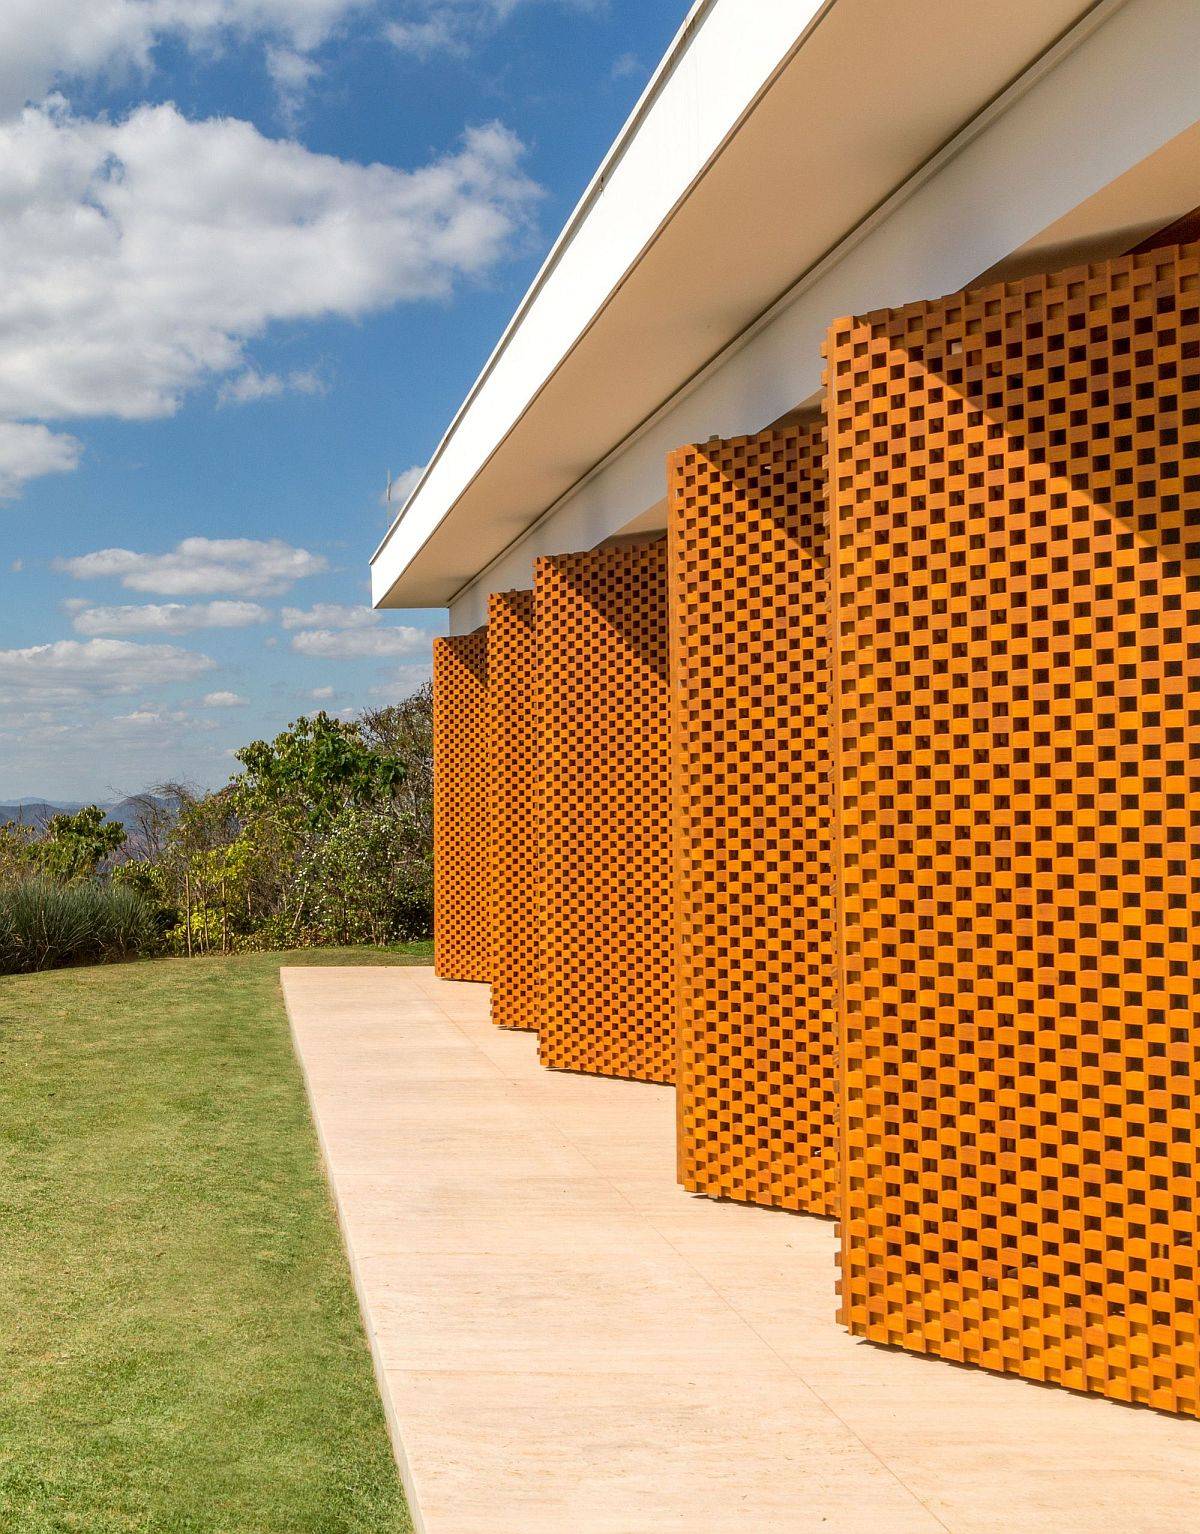 Custom-pivoting-wooden-panels-with-perforated-design-give-the-home-a-unique-identity-29553